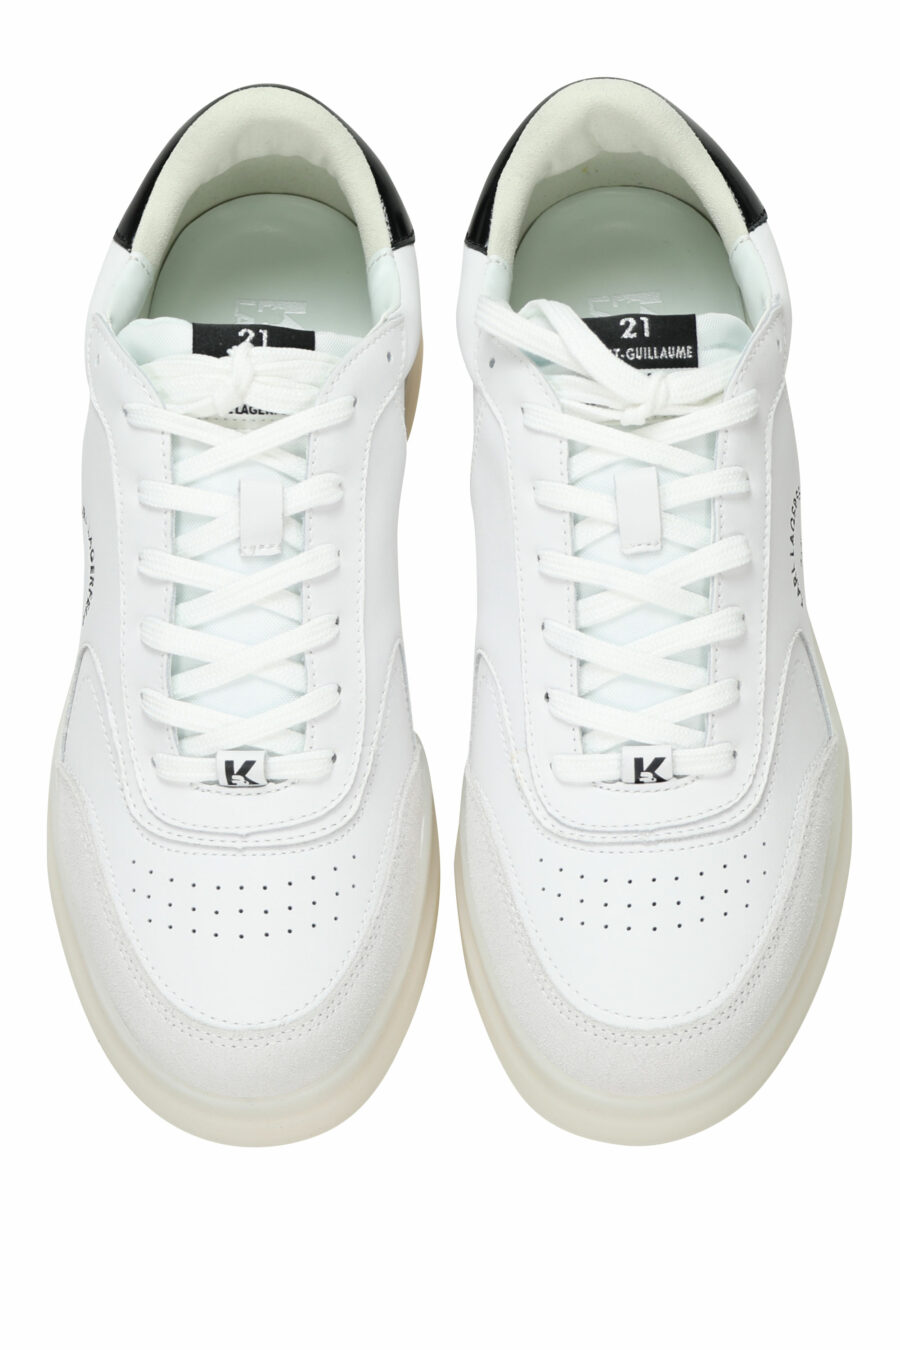 White trainers mix "brink" with mini-logo "rue st guillaume" - 5059529396984 4